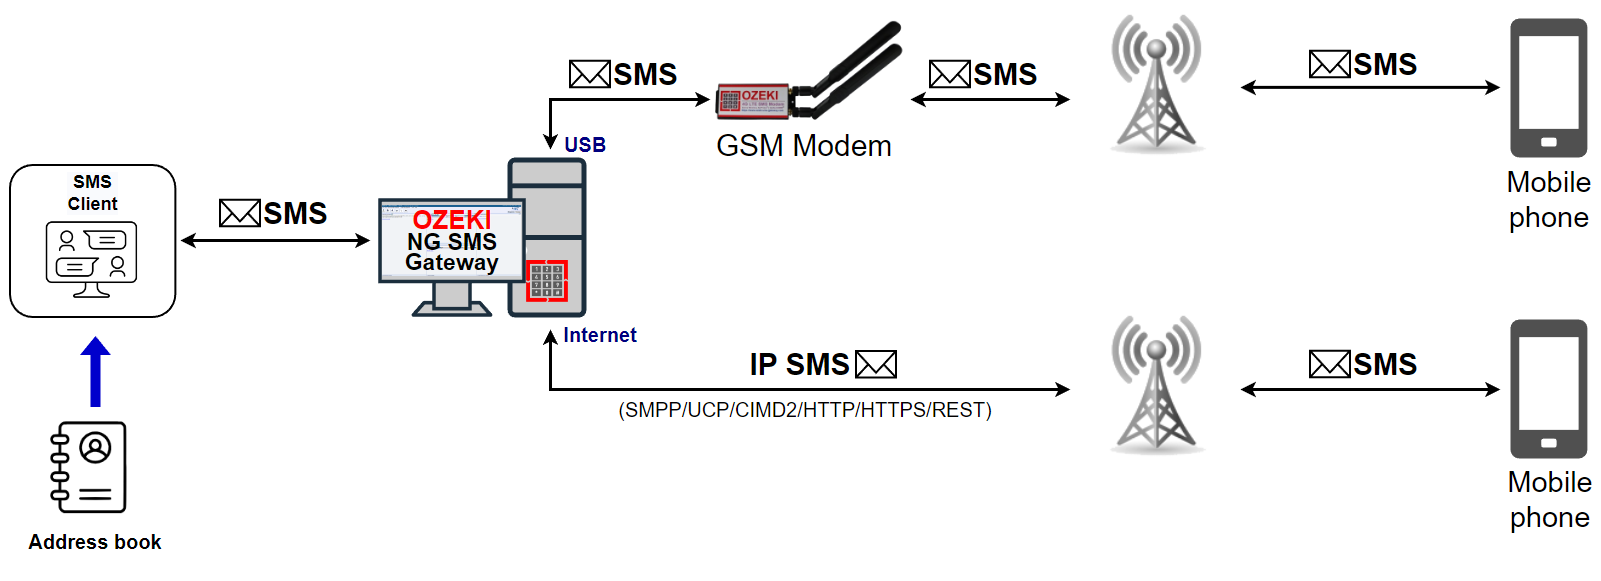 send sms message imported from address book using ozeki ng sms gateway